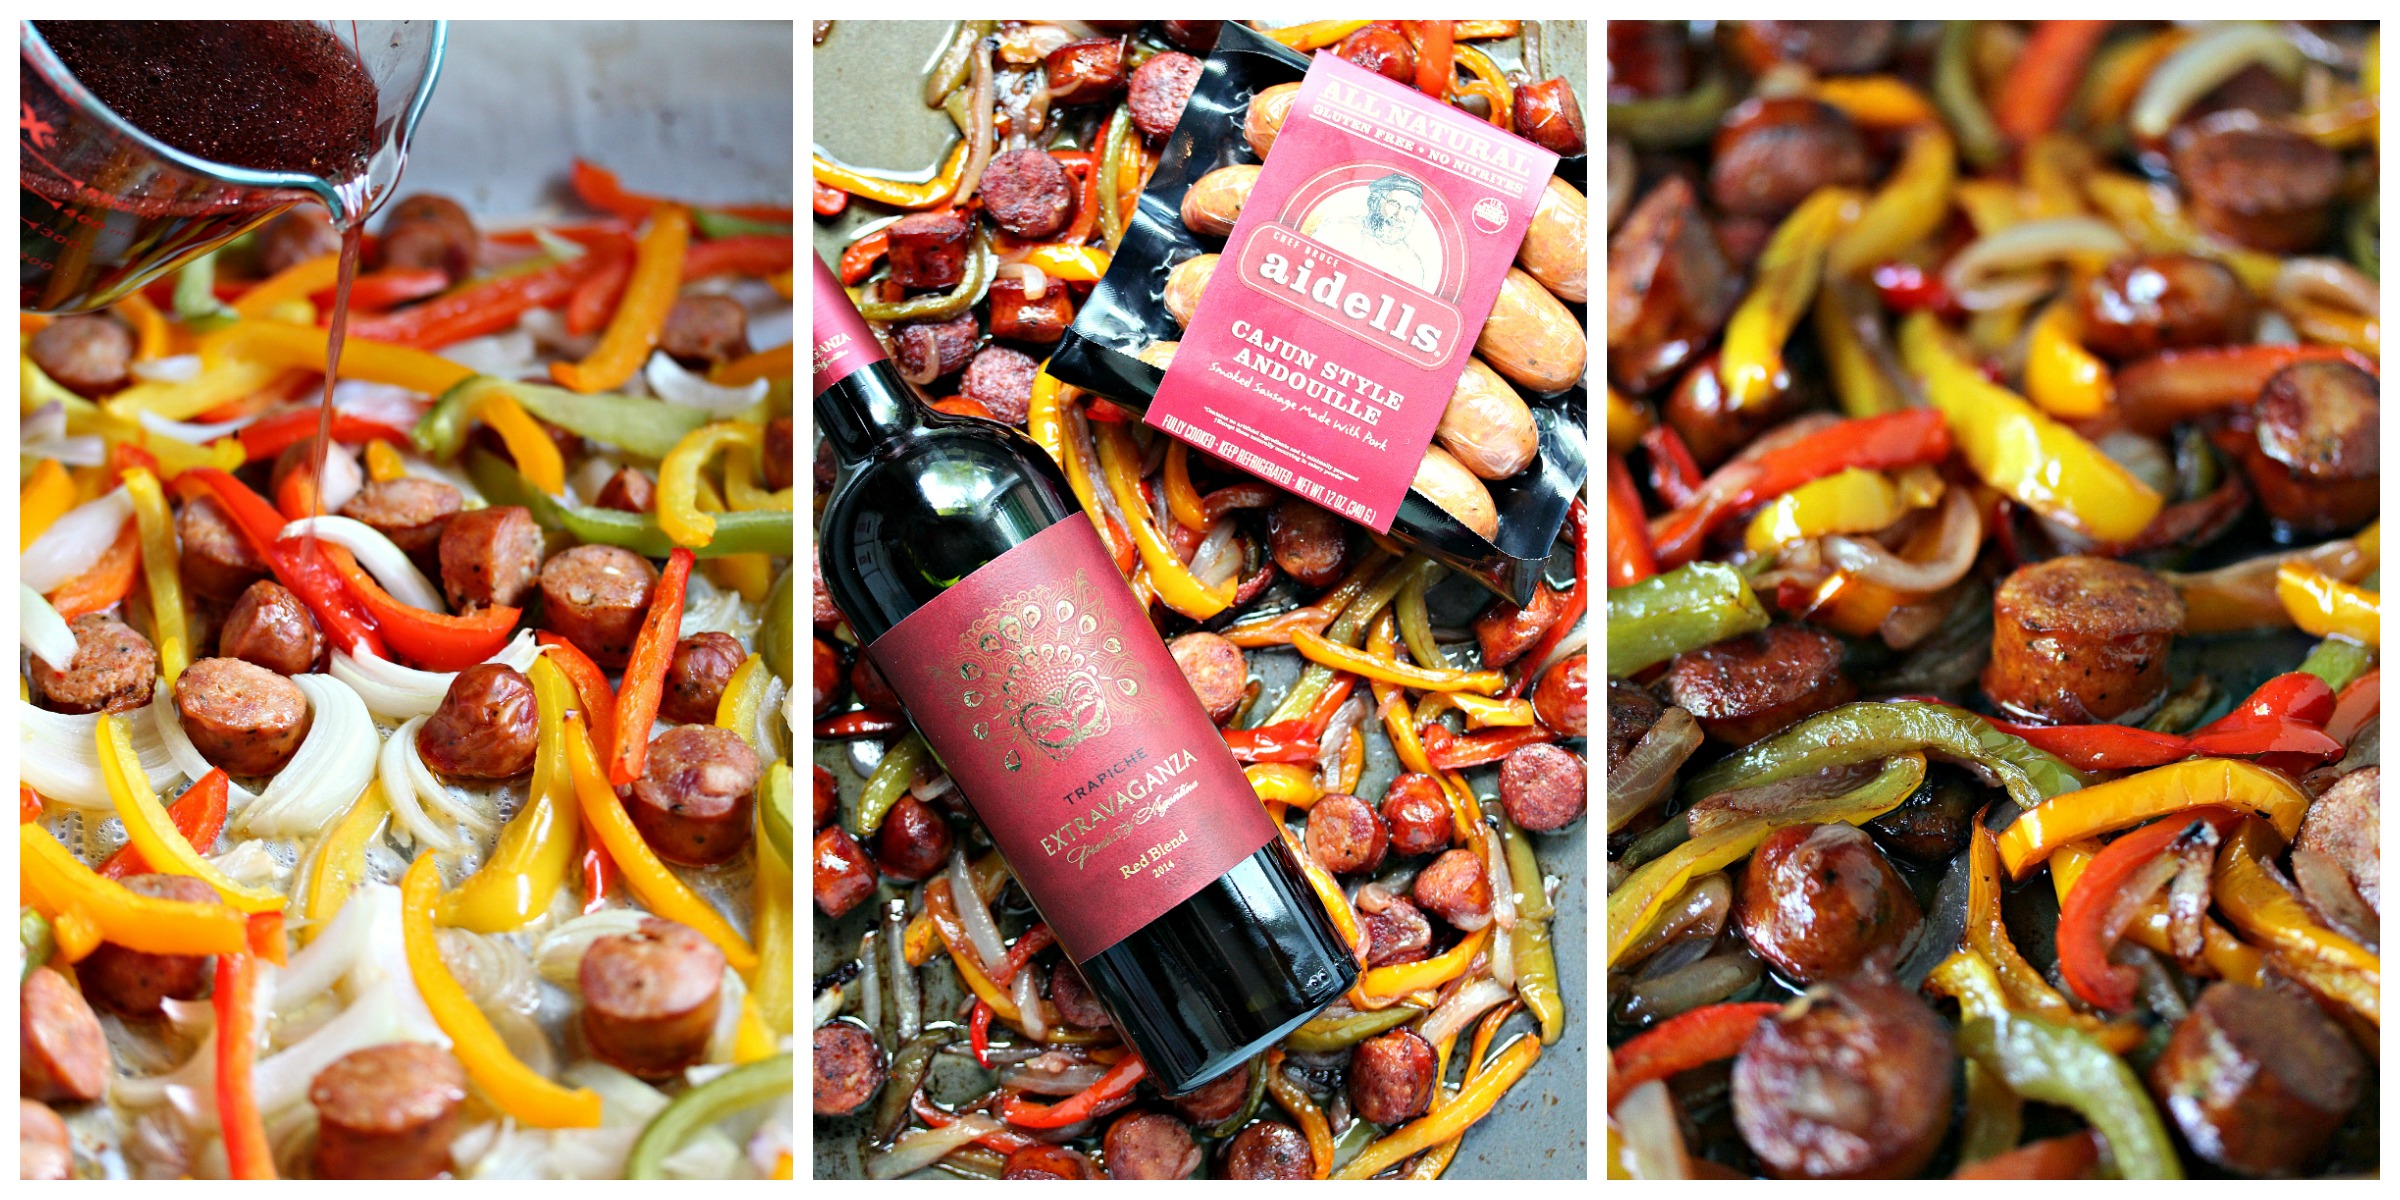 Sheet Pan Sausage and Peppers from cravingsofalunatic.com- This recipe is simple to make yet full of flavour. It's perfect to eat on its own, or pile it high on a hoagie bun. One pan, a few simple ingredients, and you have the perfect lunch or dinner recipe. (@CravingsLunatic)